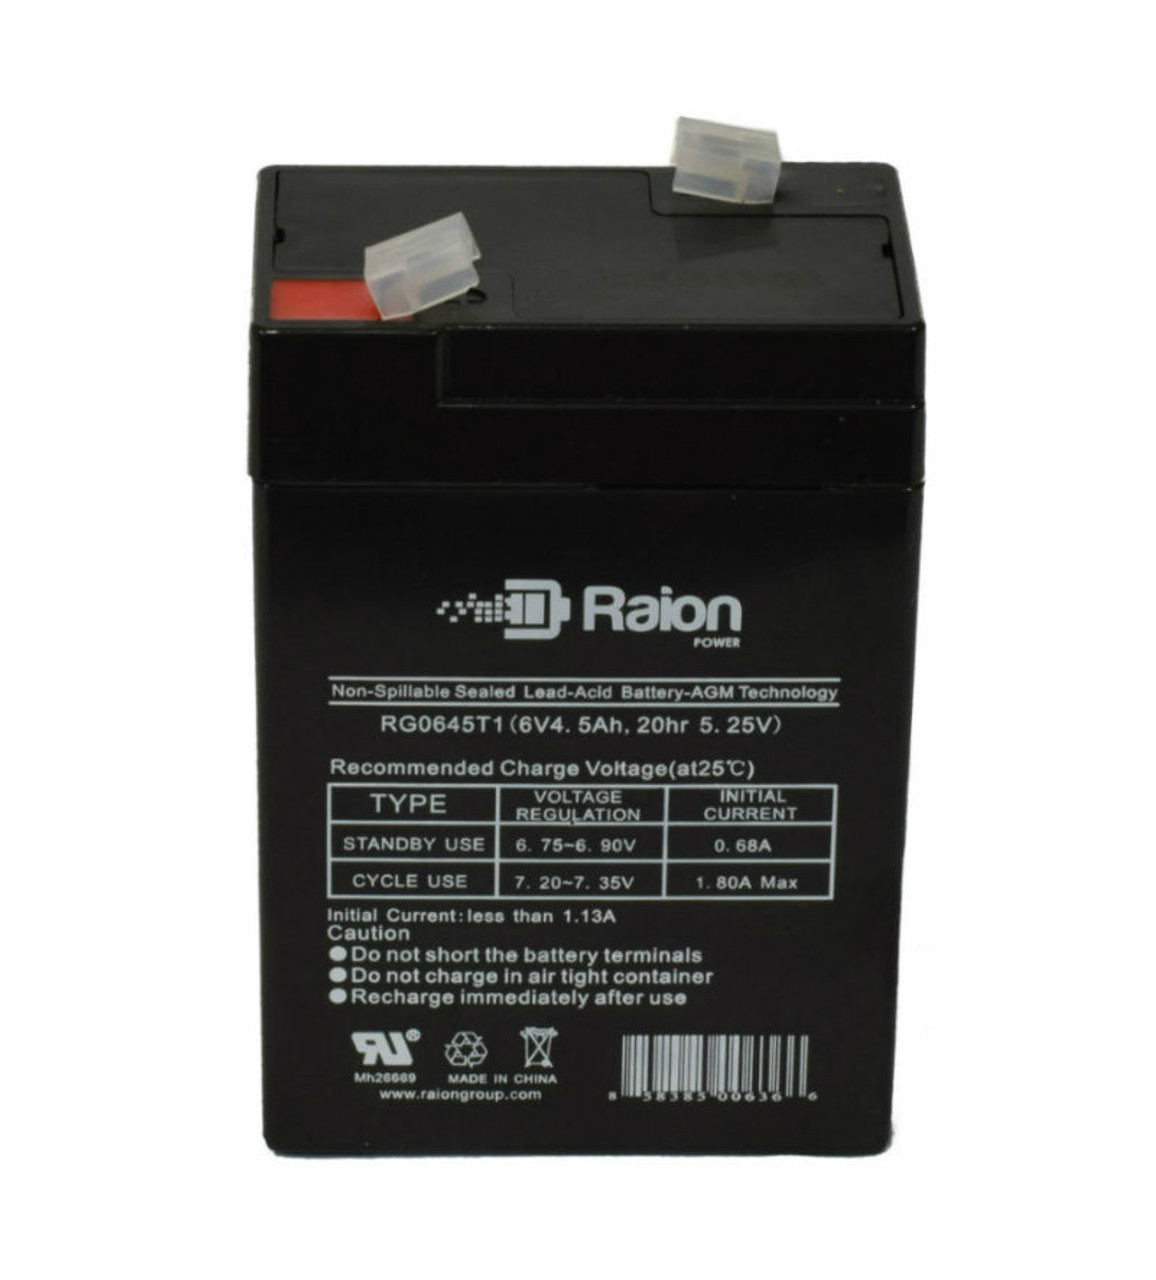 Raion Power RG0645T1 Replacement Battery Cartridge for Sonnenschein M84001A5060042S